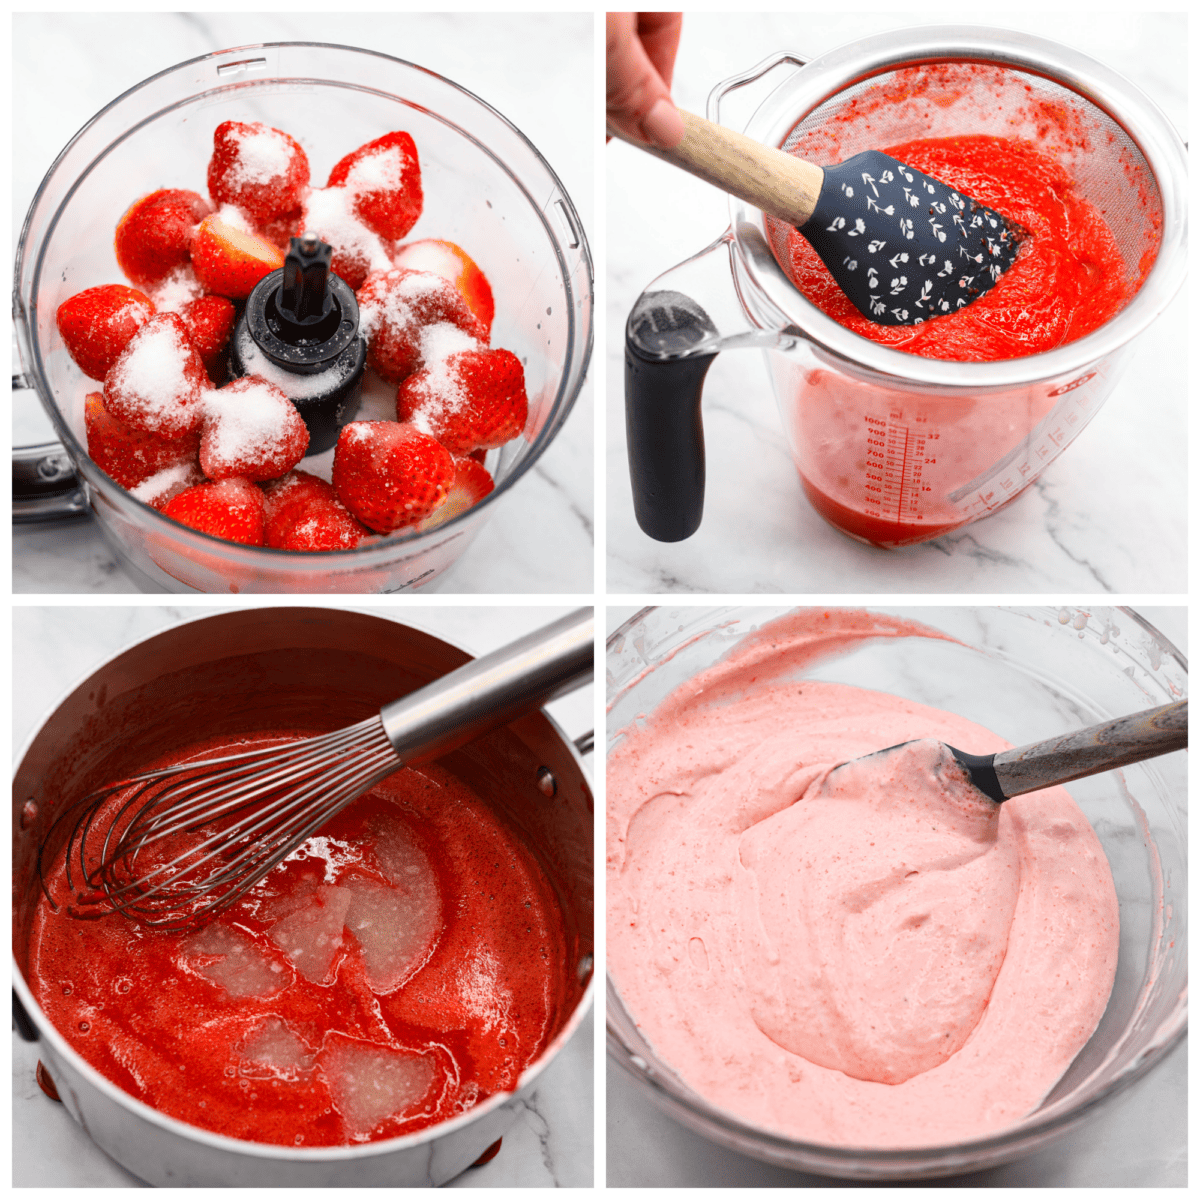 4-photo collage of the strawberry mixture being blended and whipped into a mousse.